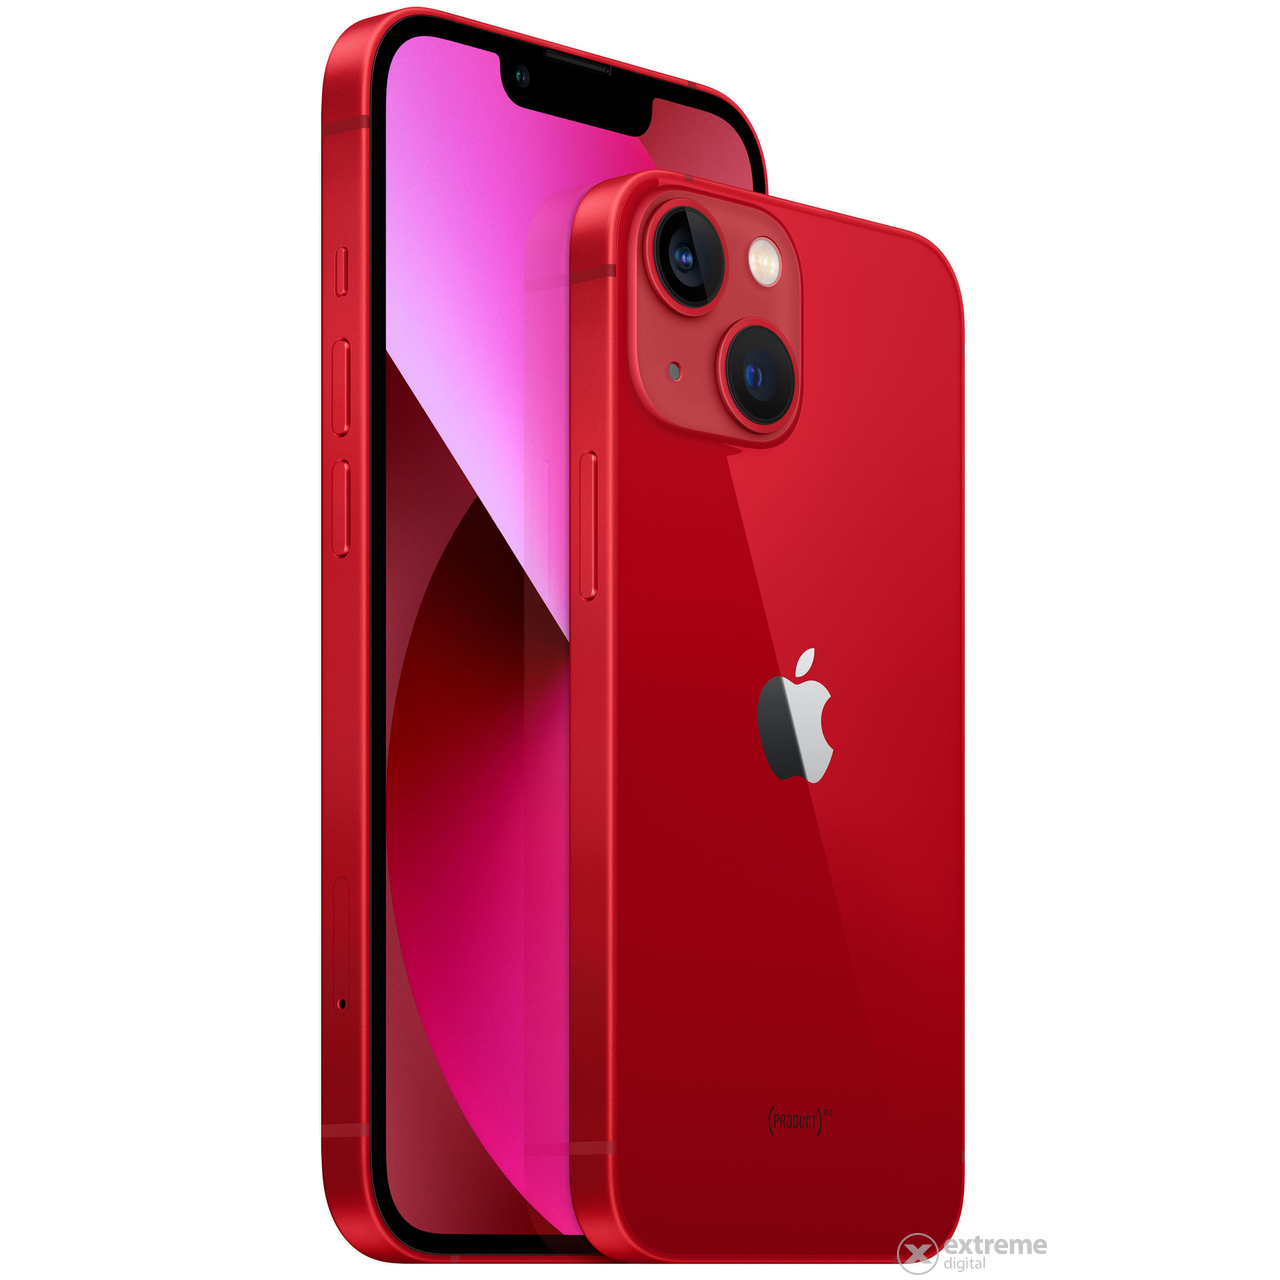 Apple iPhone 13 128GB (mlpj3hu/a), (PRODUCT)RED